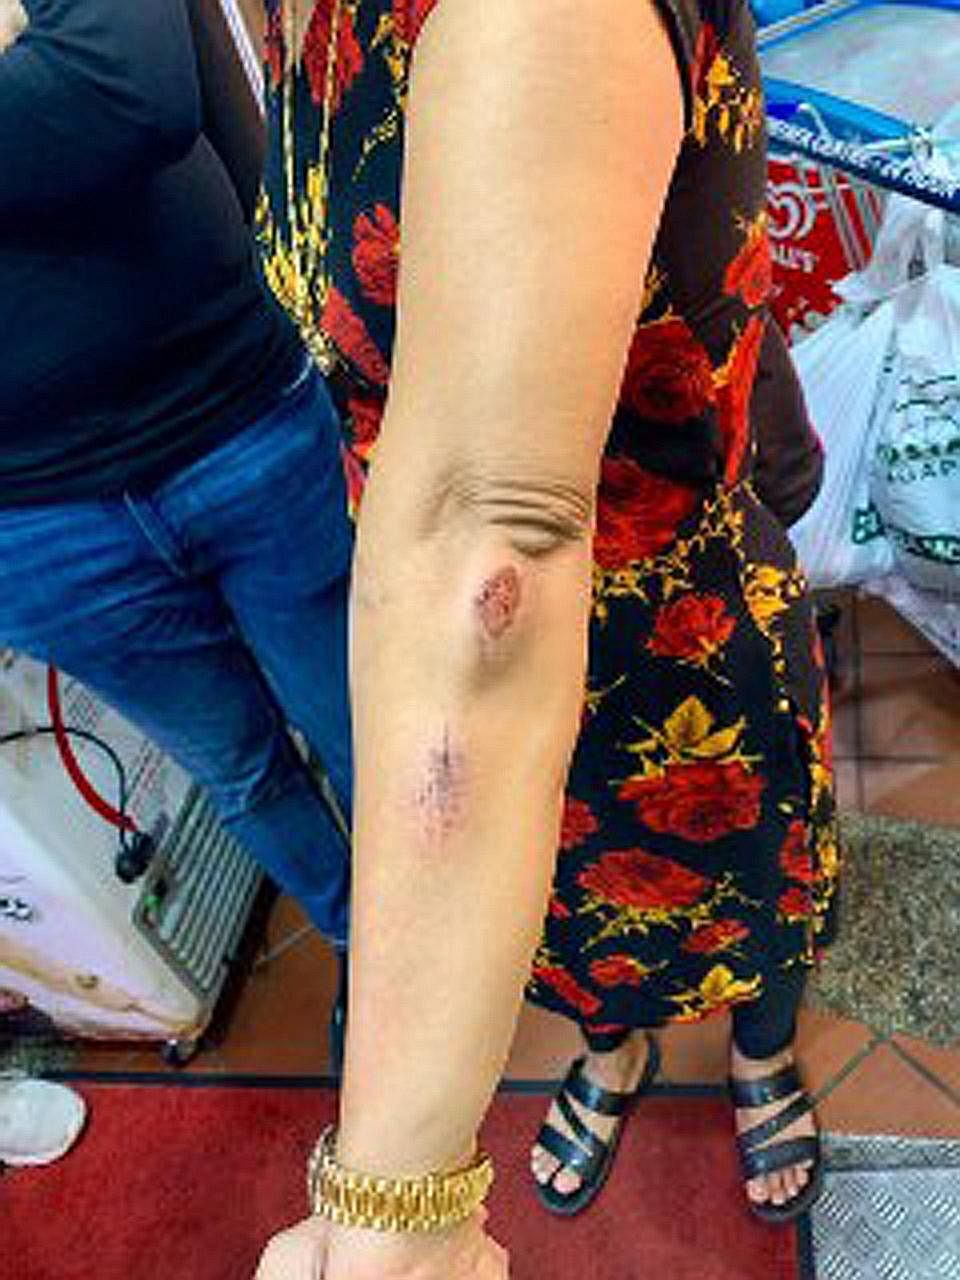 Madam Hindocha Nita Vishnubhai, 55, said she was brisk walking from Choa Chu Kang MRT station towards the stadium at about 8.30am last Friday when the alleged attack occurred near Northvale Condominium (top). She has scratches (above) on her arms and